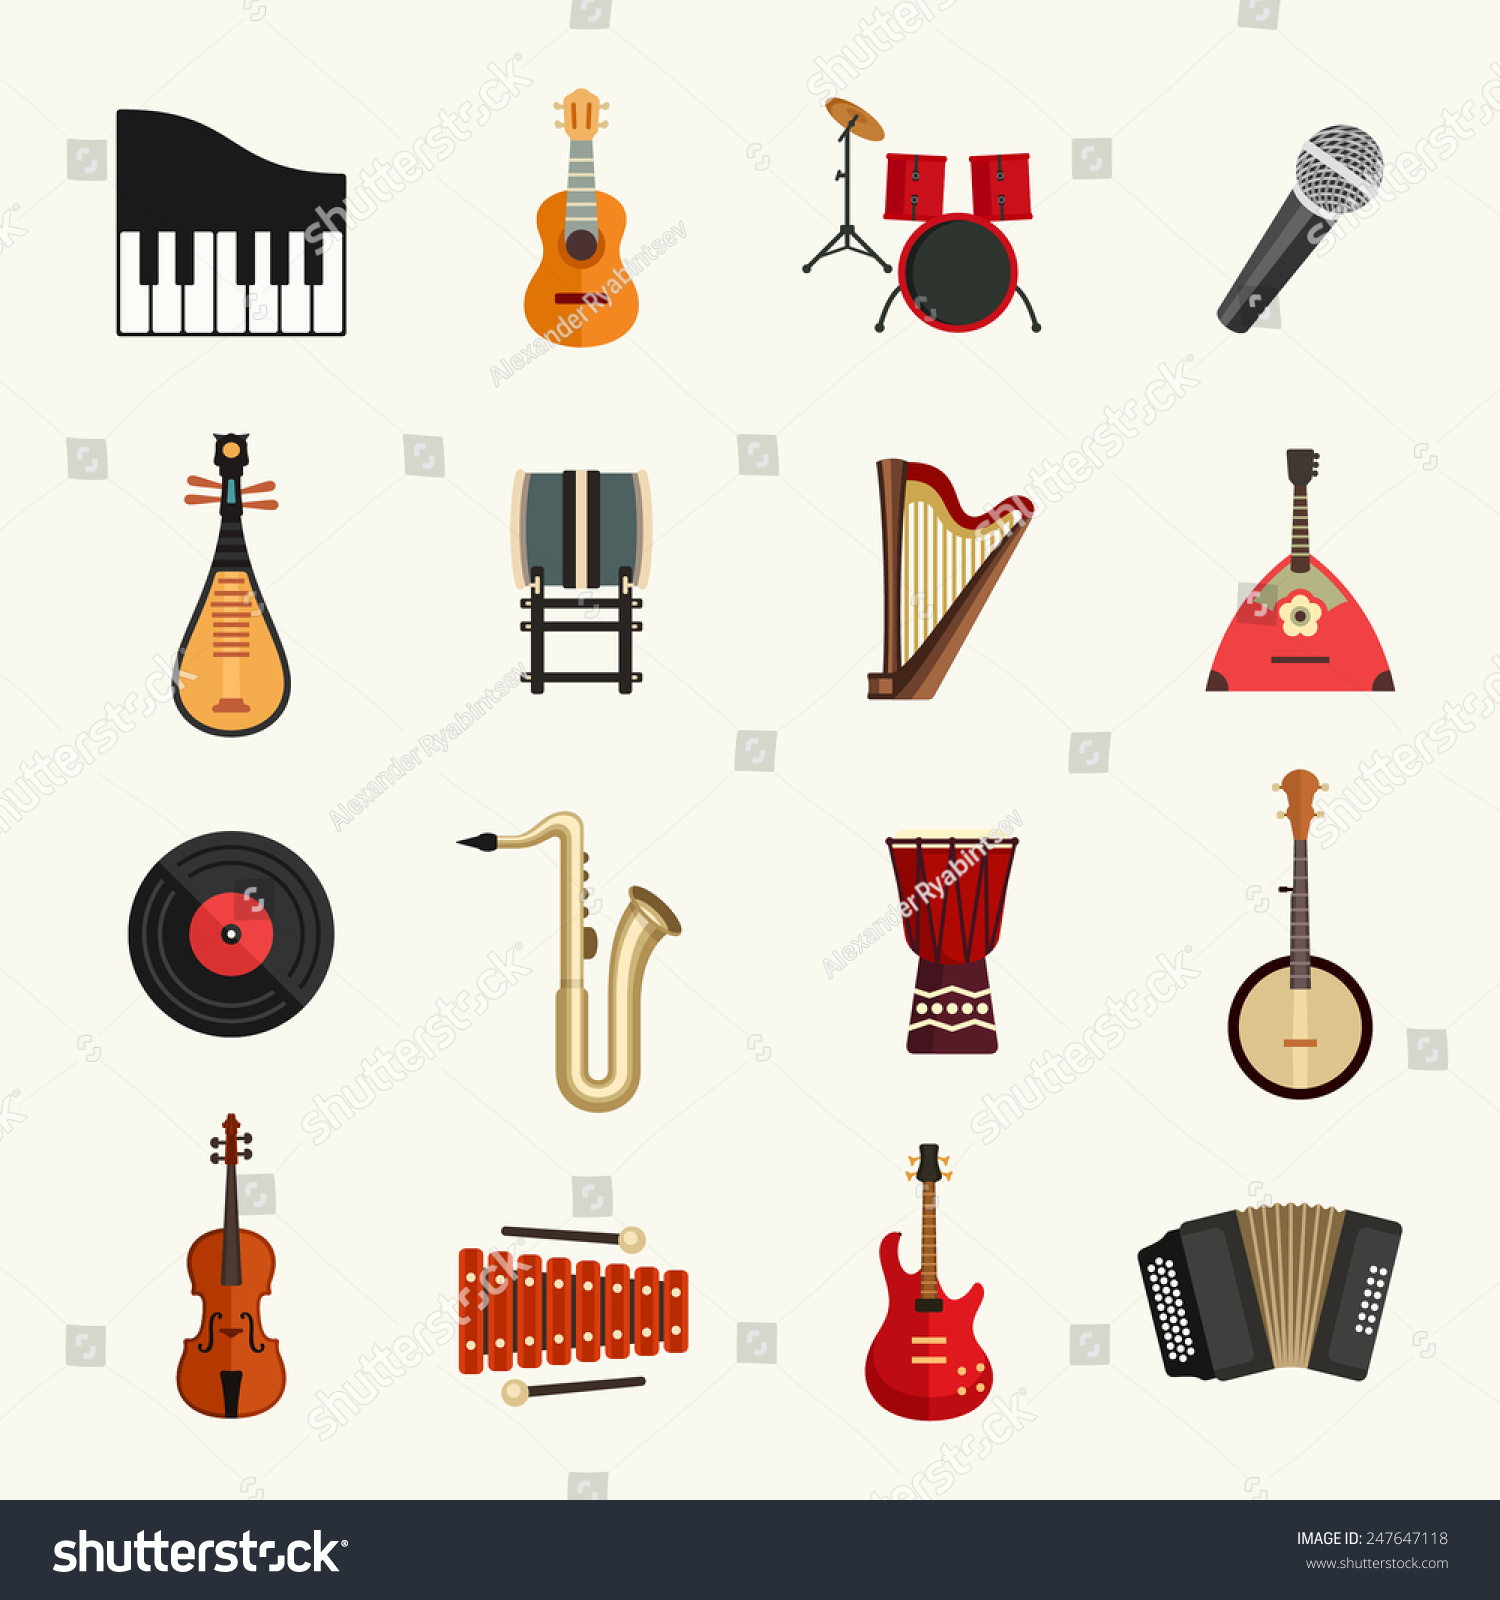 music instruments clipart download - photo #49